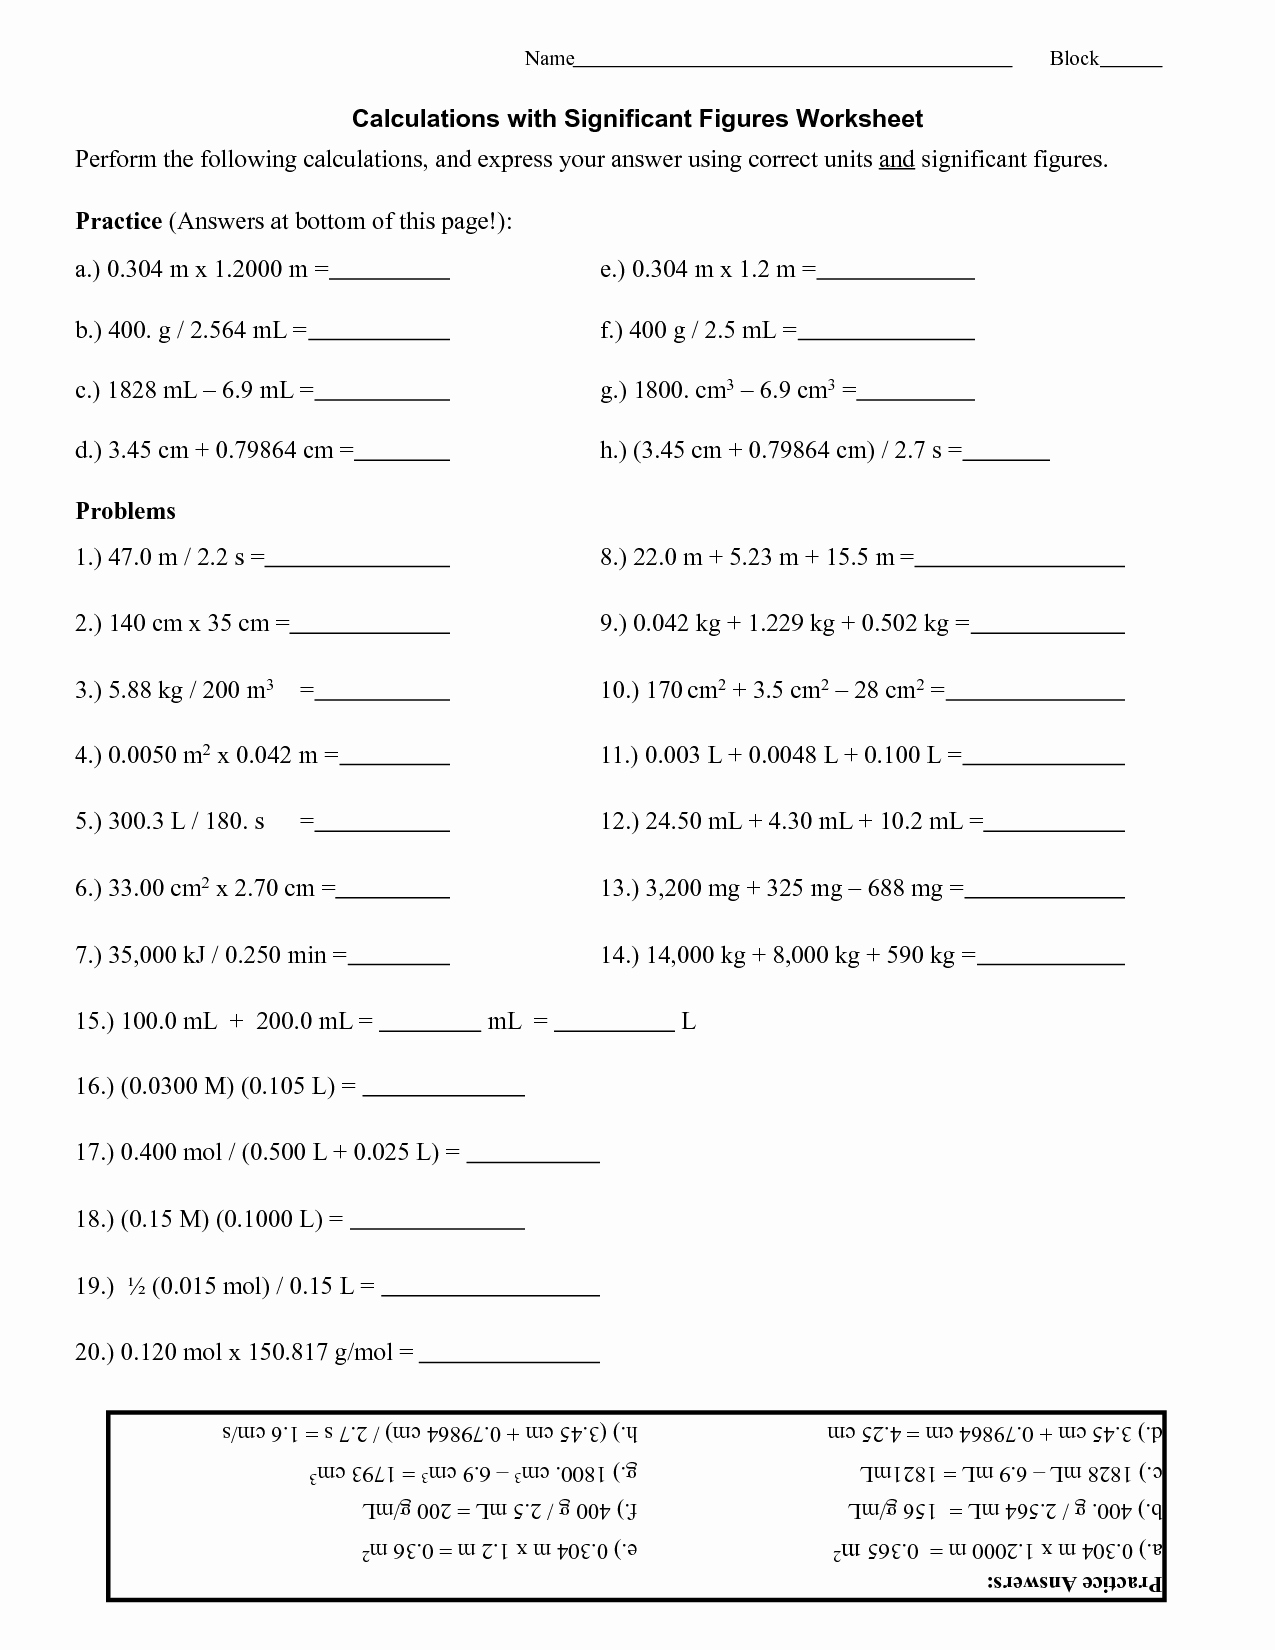 Significant Figures Worksheet with Answers Beautiful 8 Best Of Significant Figures Worksheet with Answer